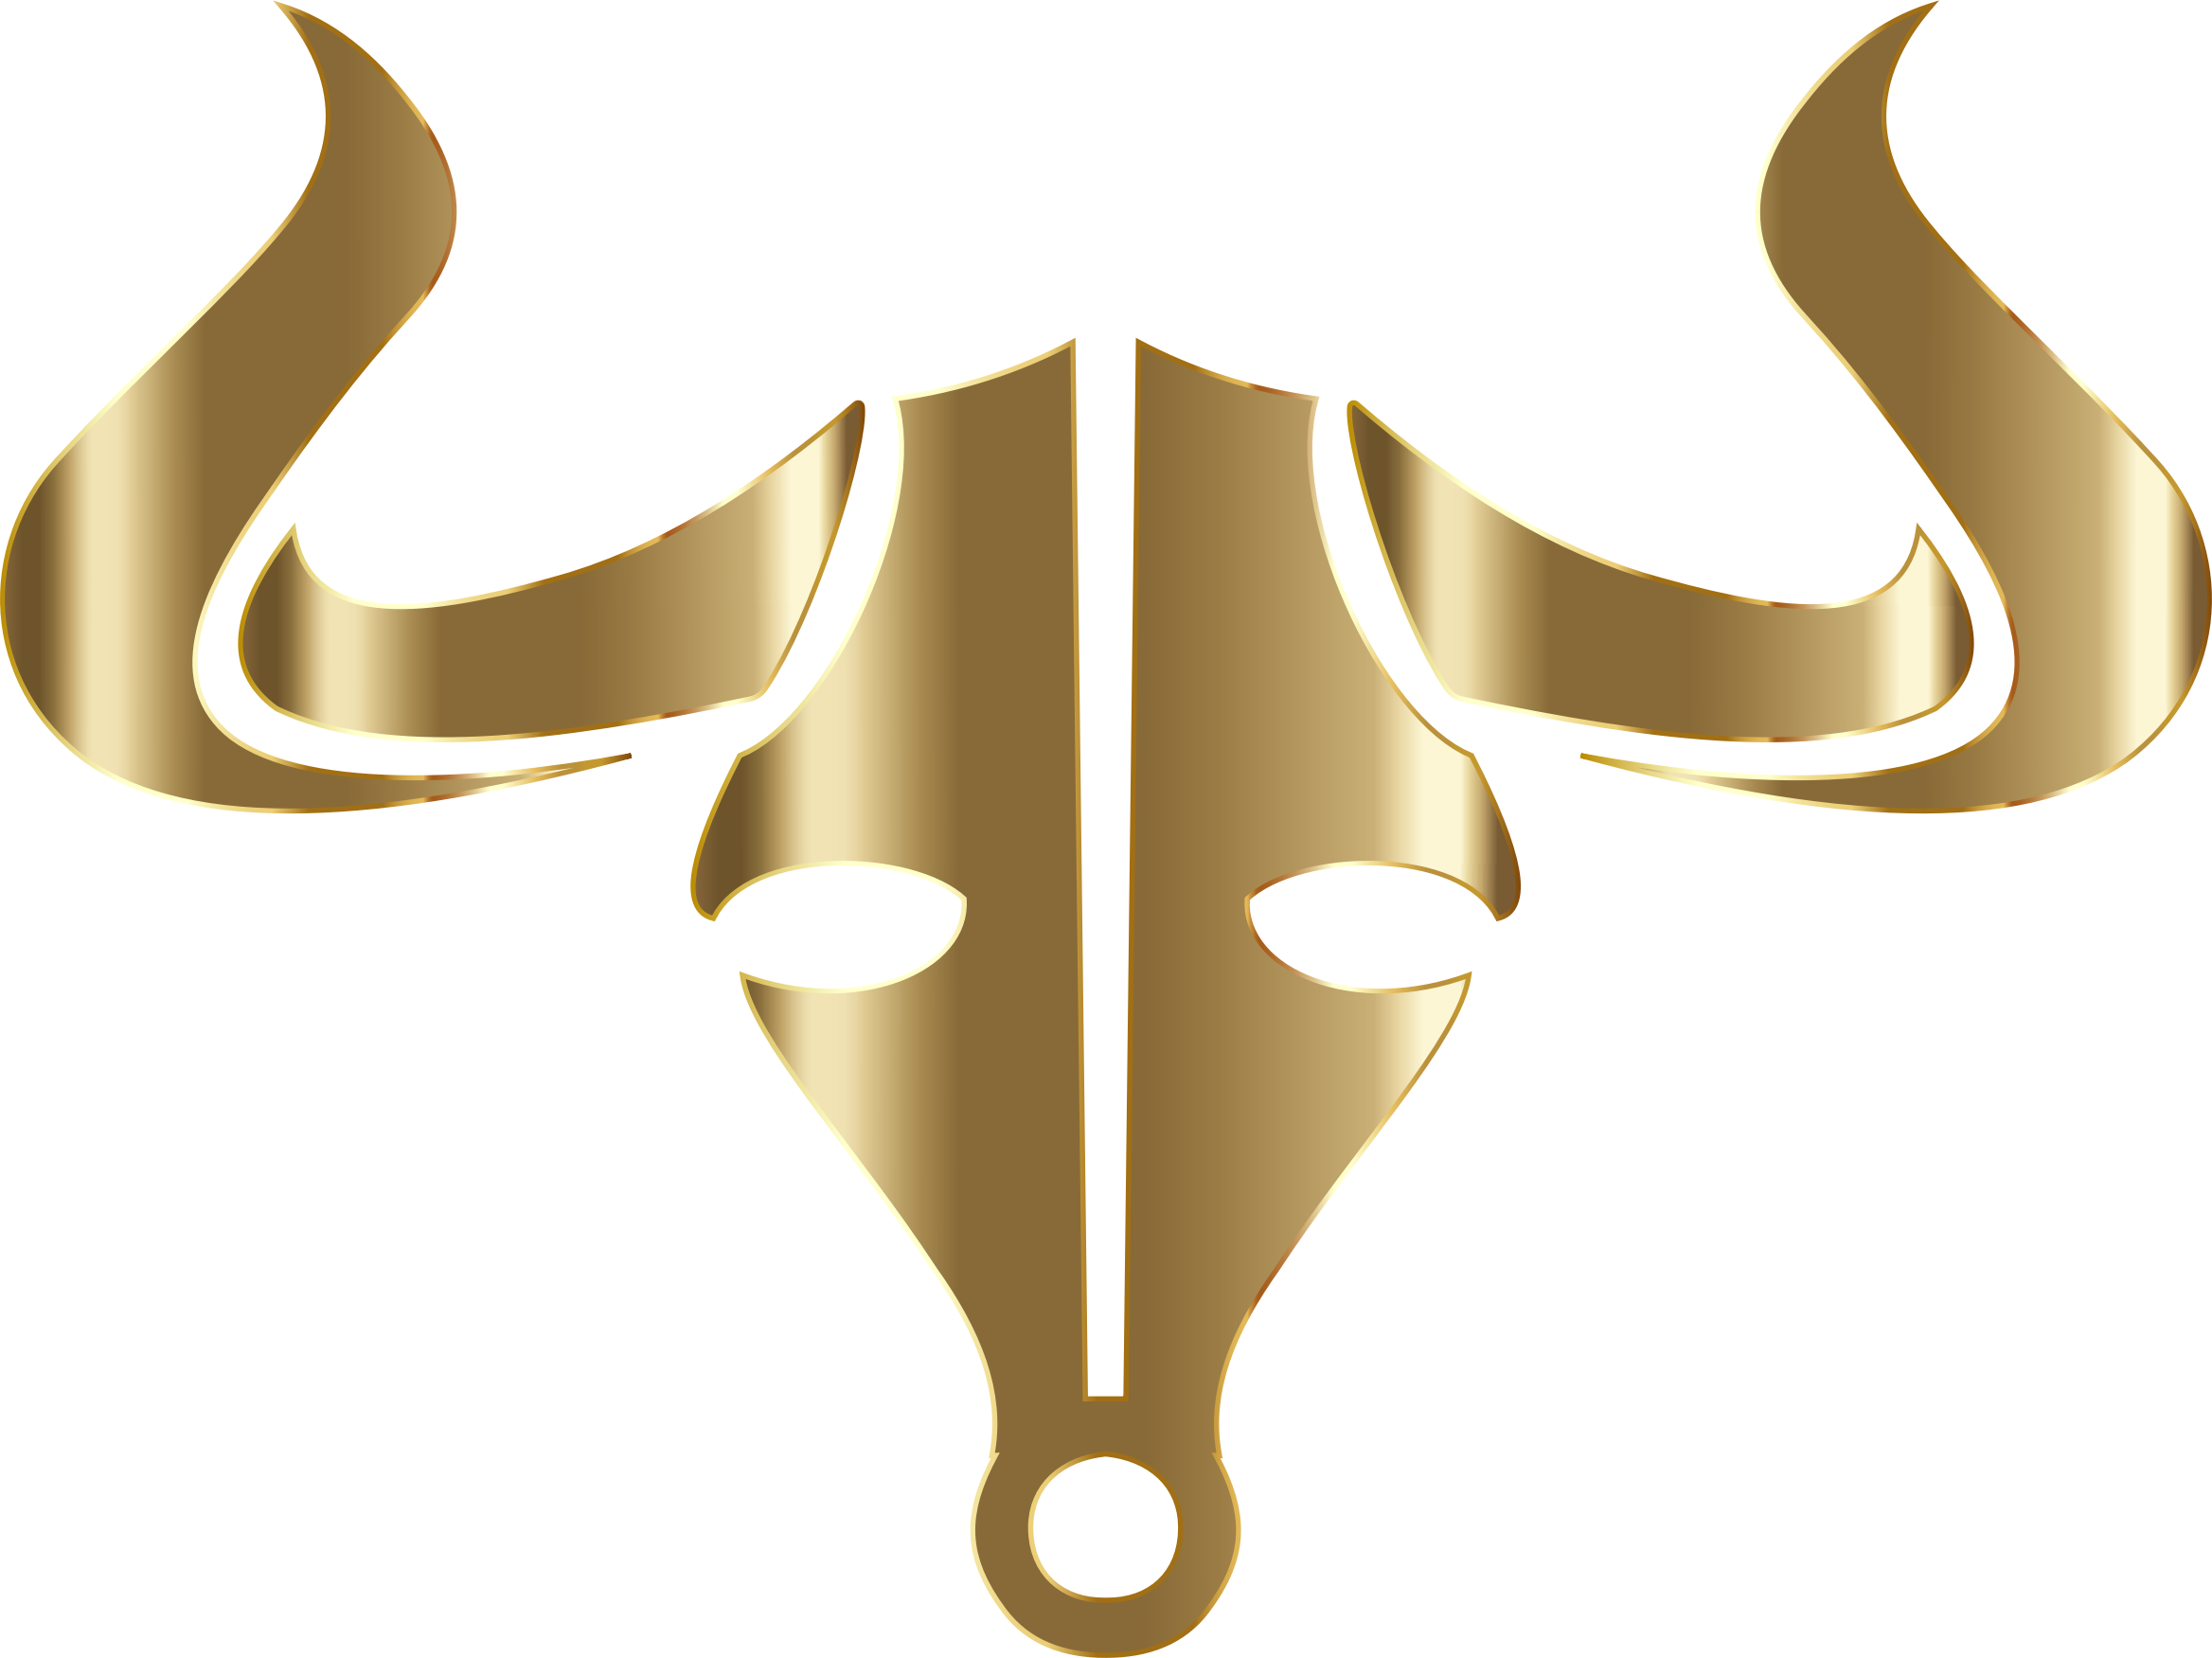 This Free Icons Png Design Of Gold Bull Icon No Background Hdpng.com  - Bull By The Horns, Transparent background PNG HD thumbnail